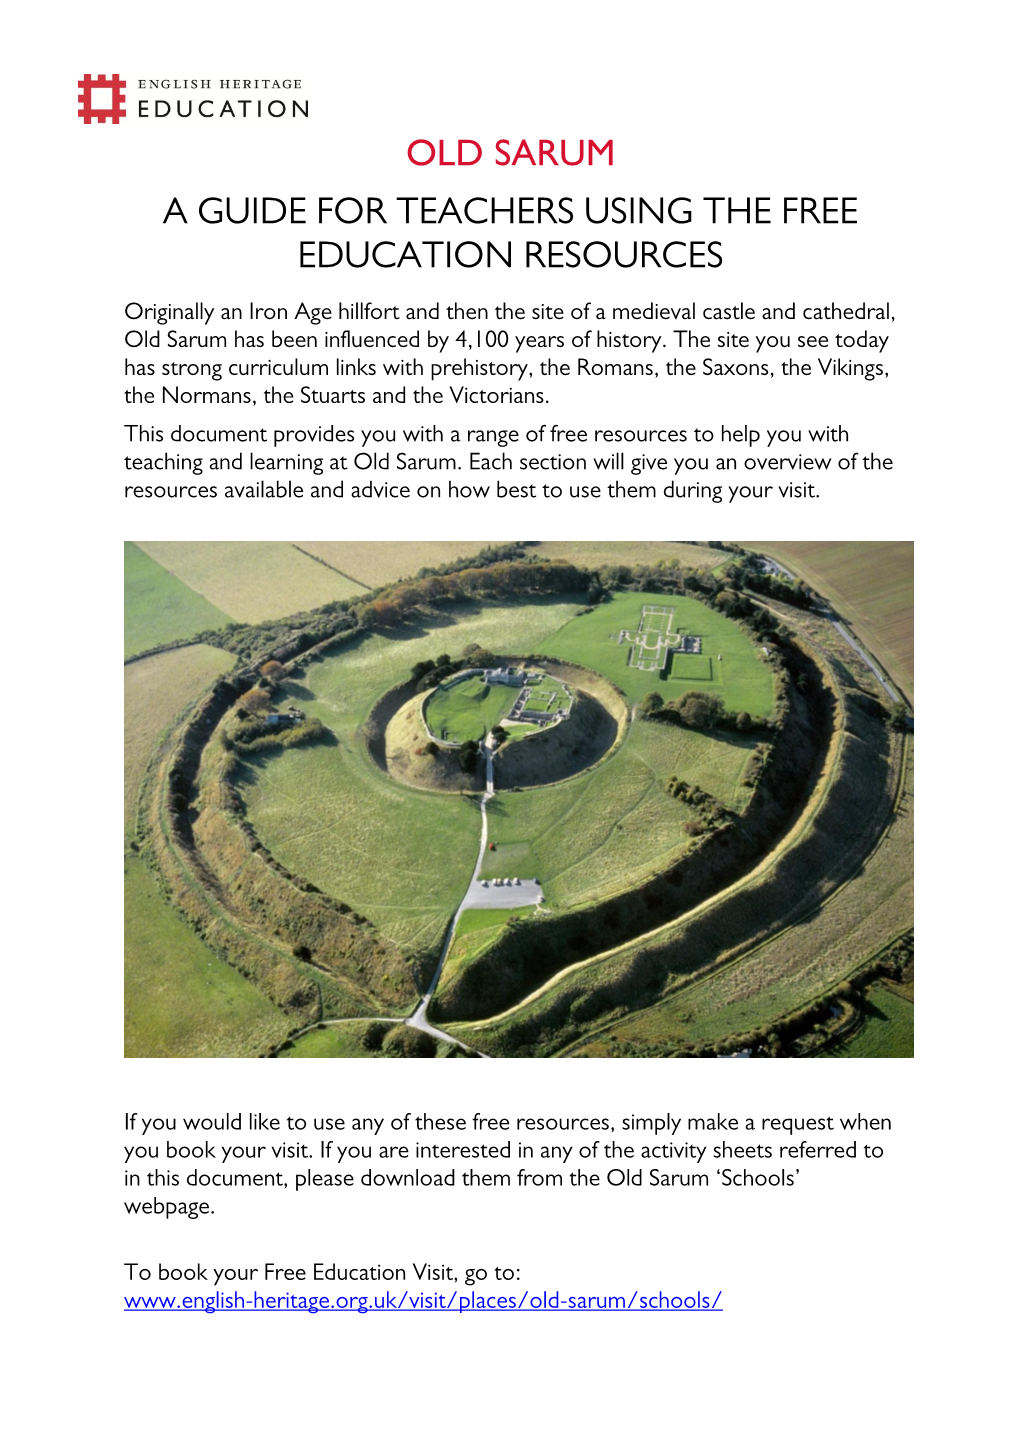 Old Sarum Teachers' Guide to Using Free Education Visit Resources